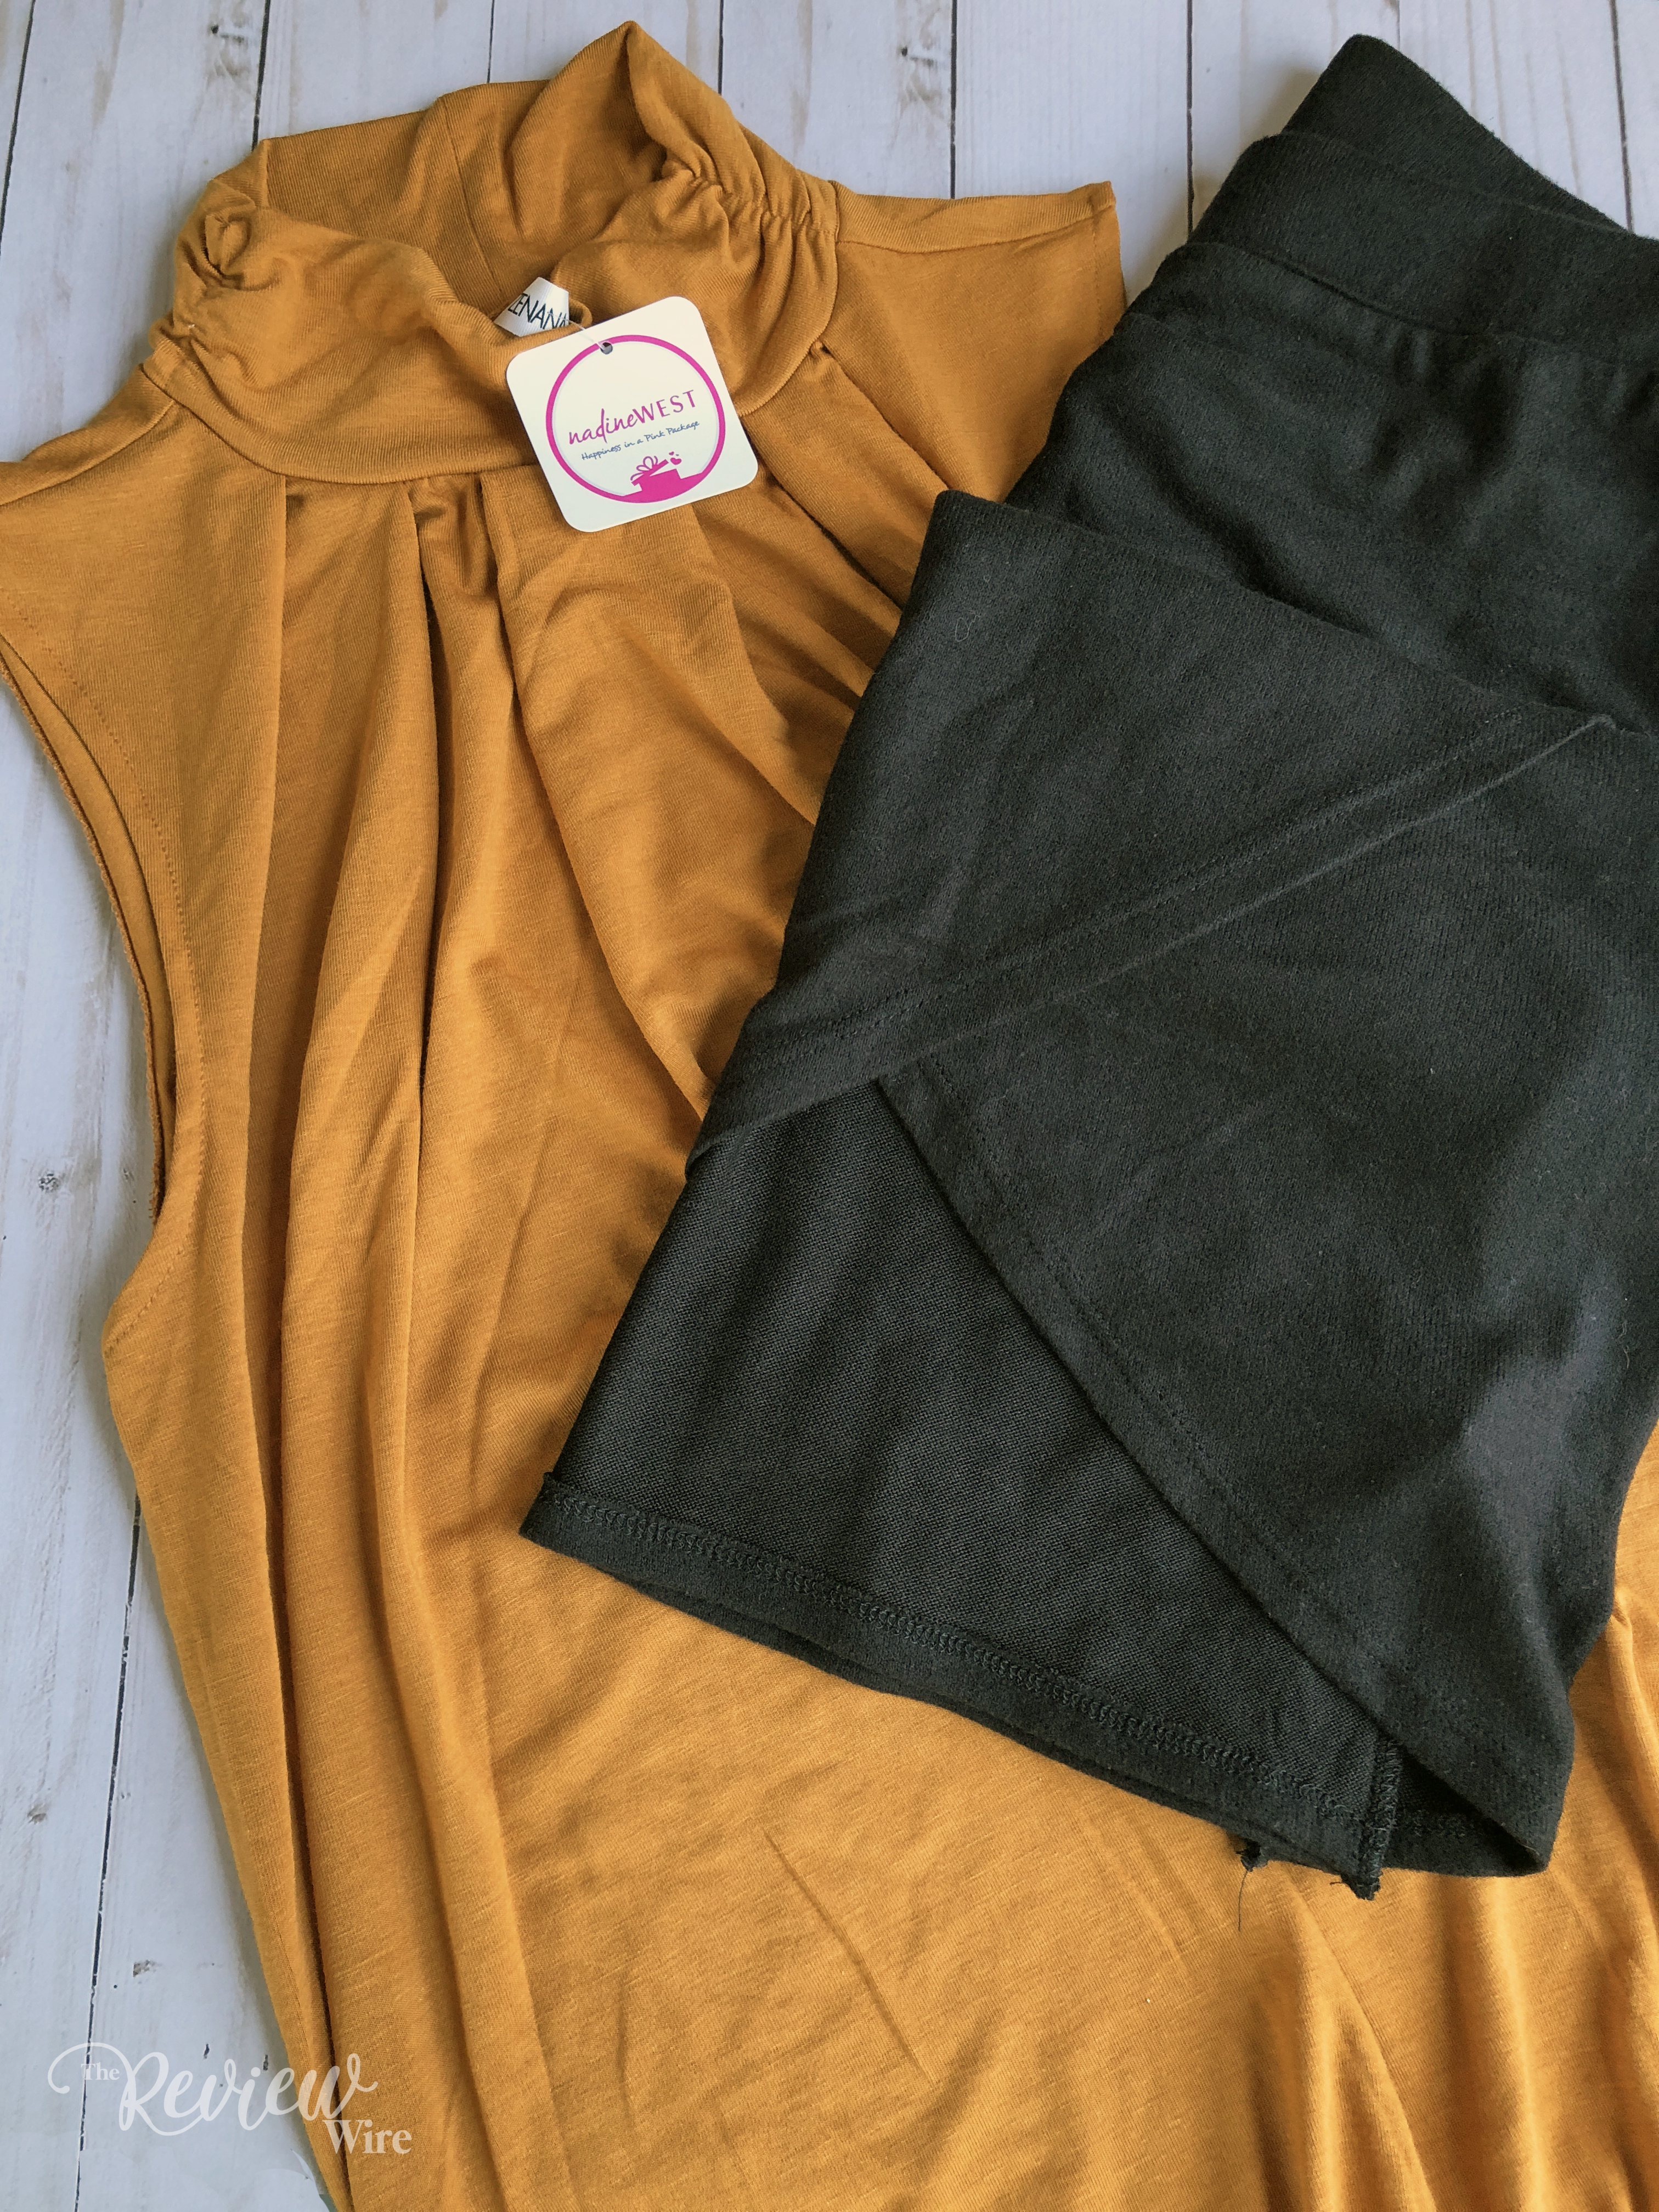 The Review Wire Nadine West April 2019 Mustard Sleeveless & Skirt